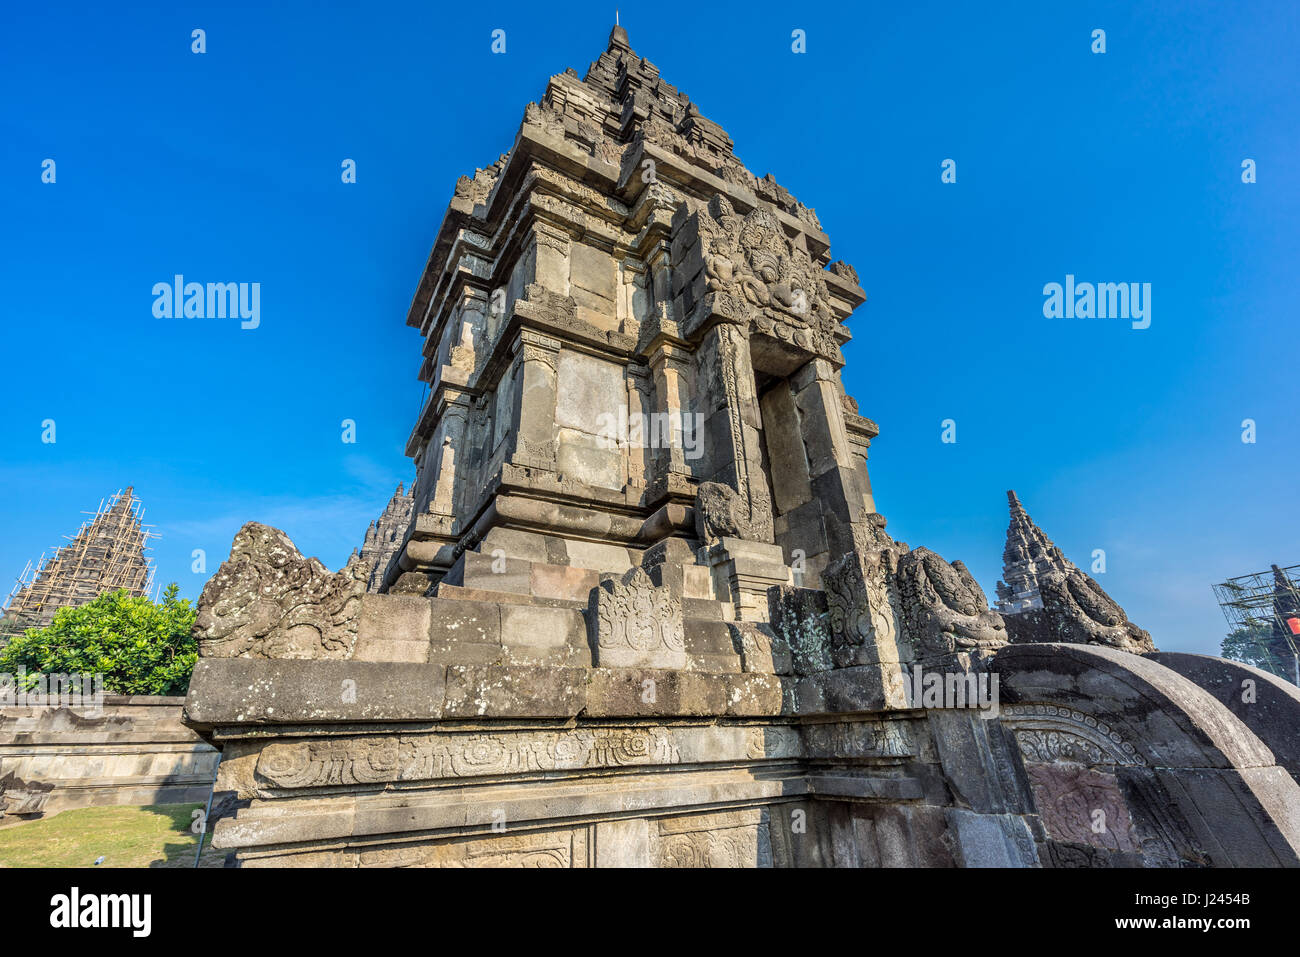 Side view of Kala-Makara of Candi Perwara Temple in Prambanan temple complex. 9th century Hindu temple compound located on Central Java, Indonesia Stock Photo